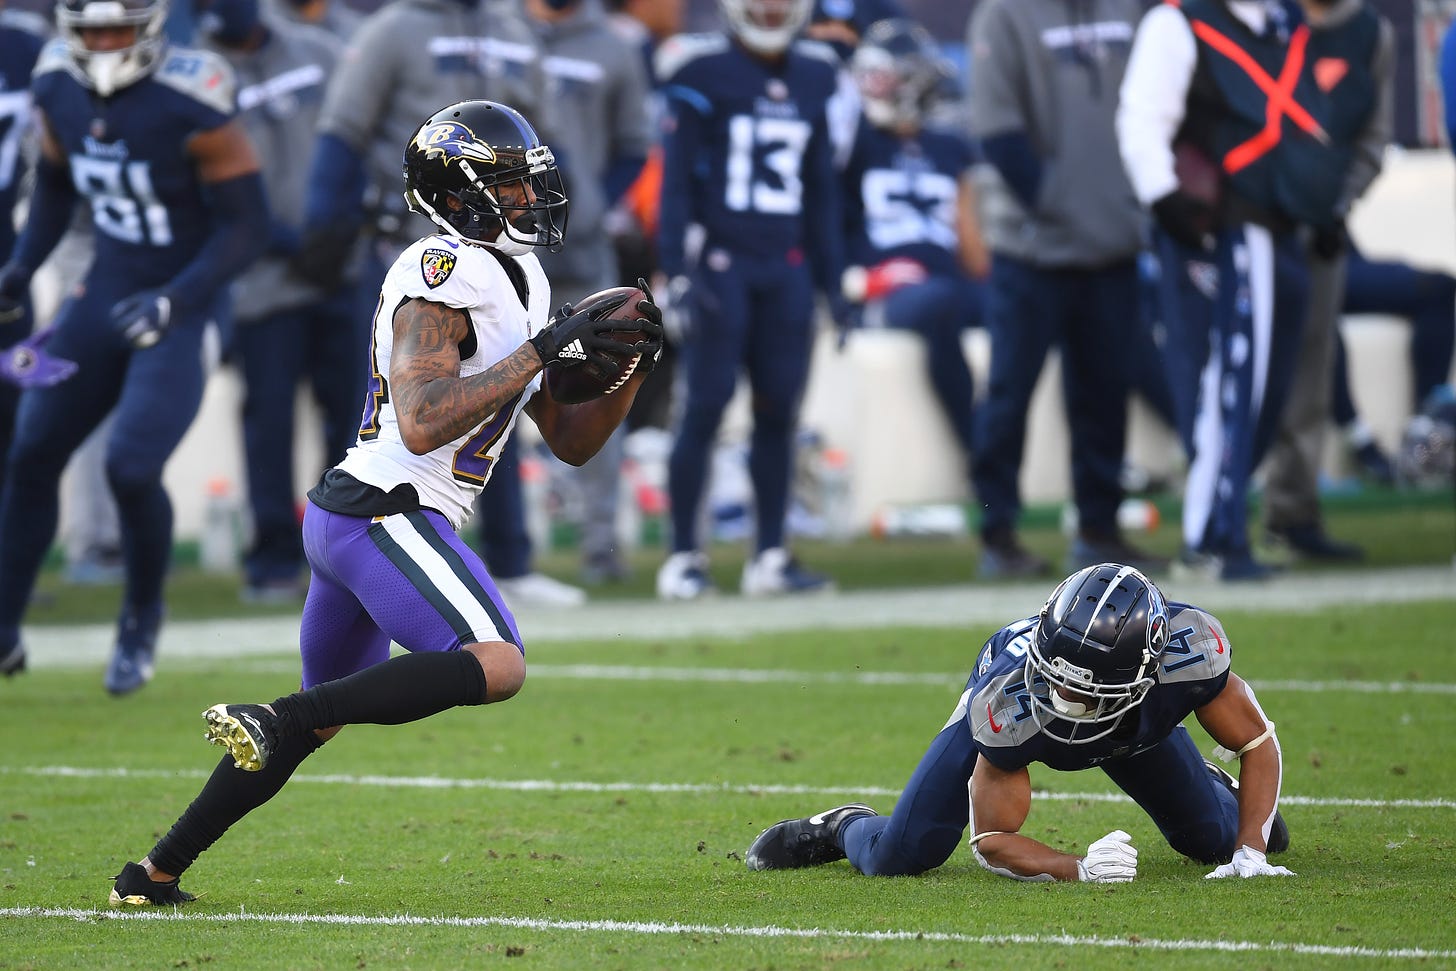 Reports: Ravens CB Marcus Peters fined $15K for taunting | Reuters